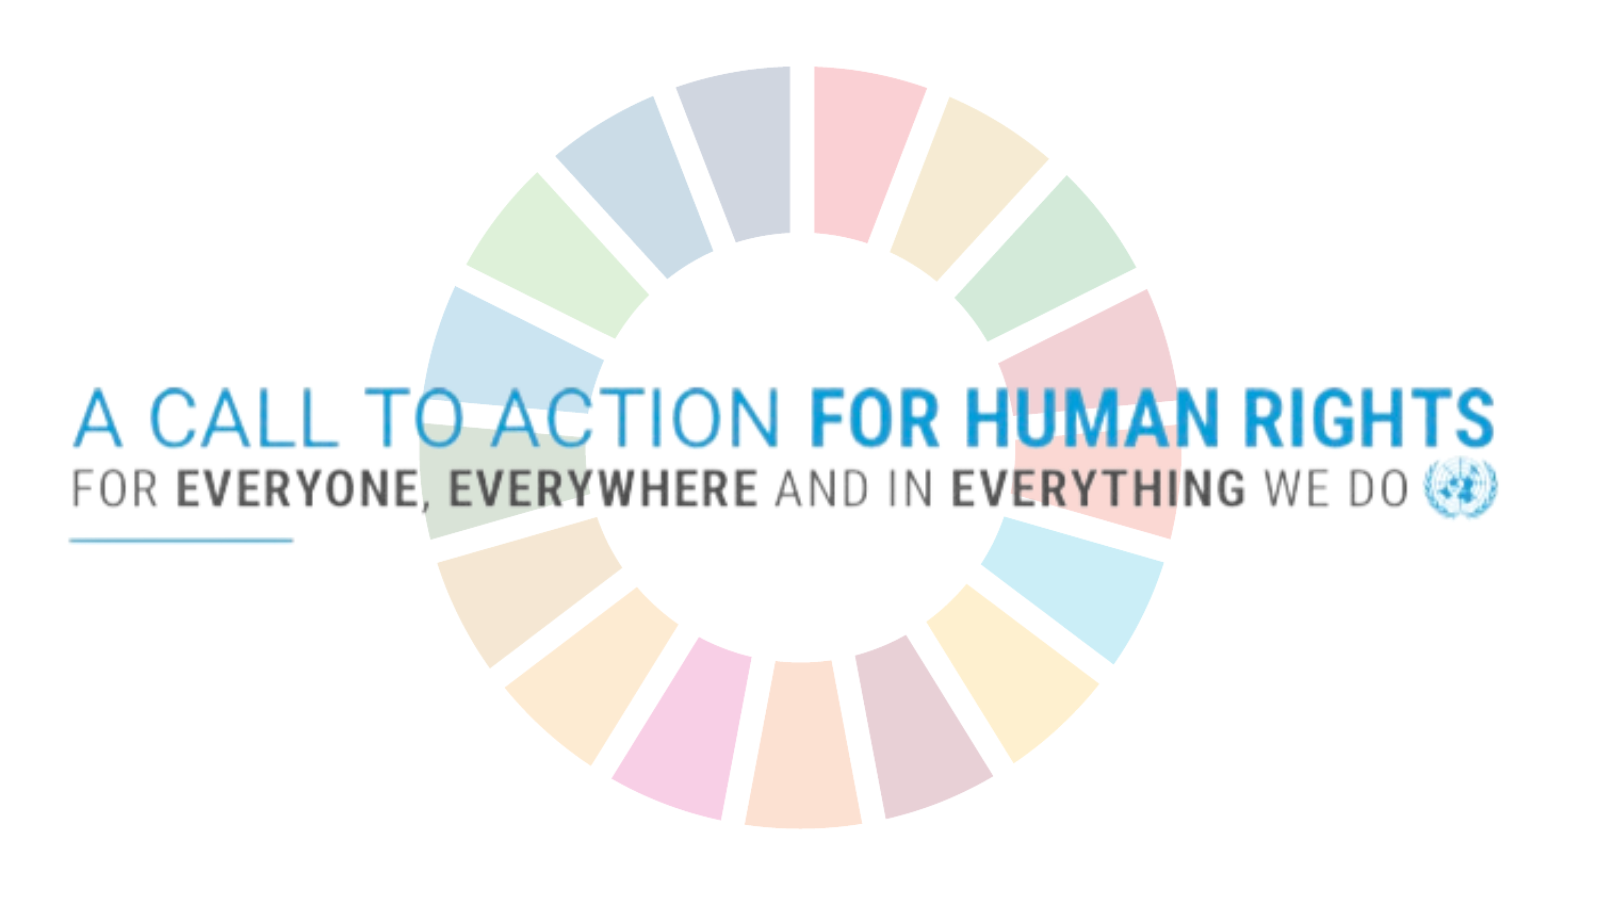 A Call to Action For Human Rights: For Everyone, Everywhere and in Everything We Do